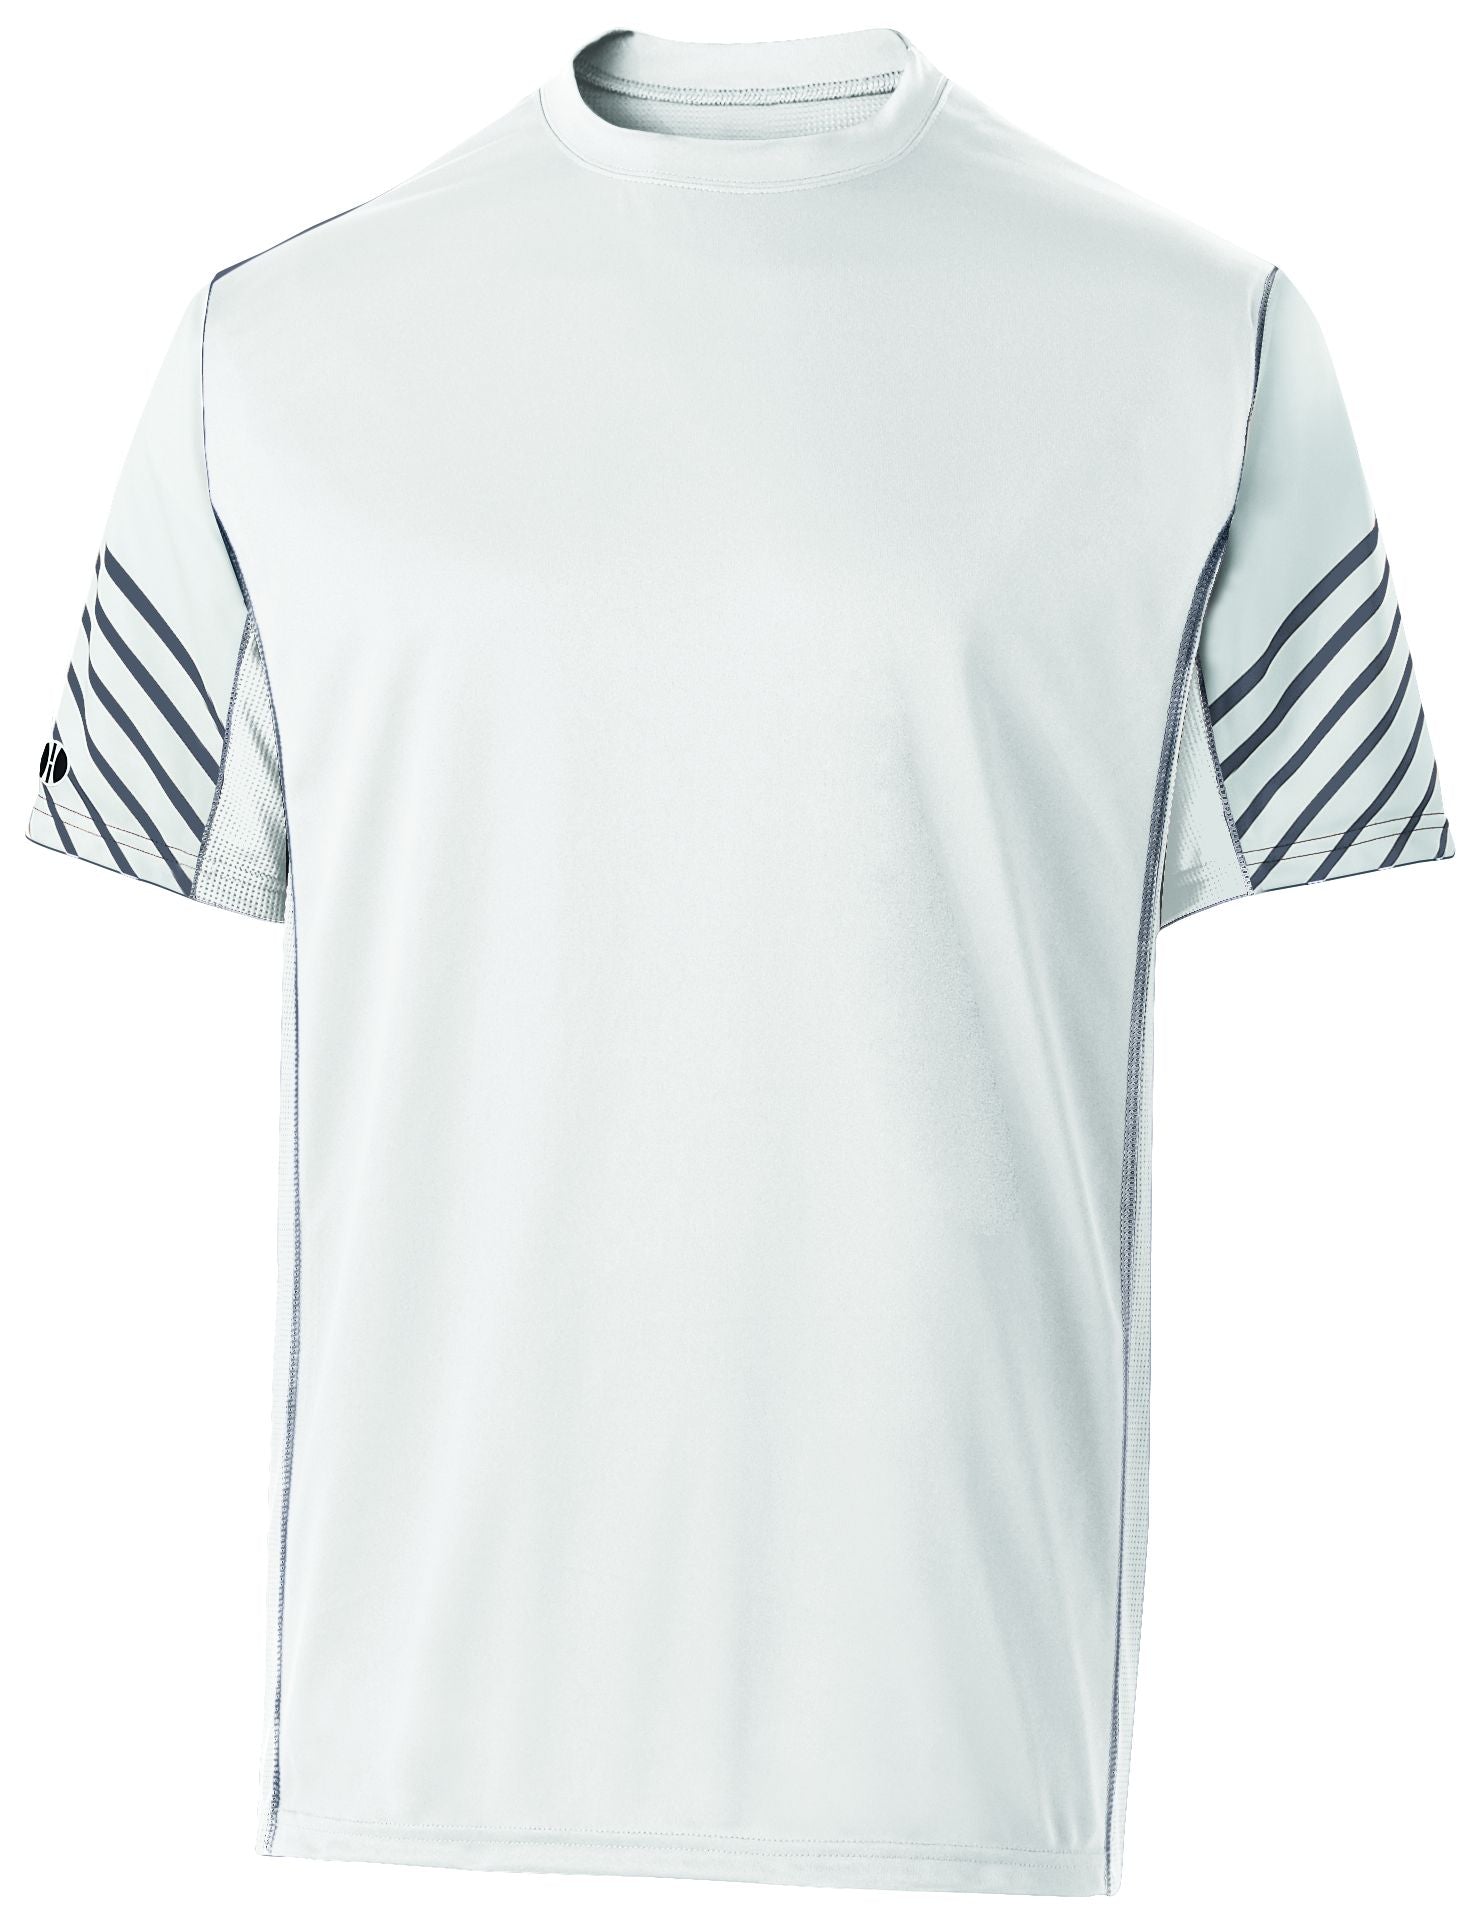 Holloway Youth Arc Short Sleeve Shirt in White/Carbon  -Part of the Youth, Holloway, Shirts product lines at KanaleyCreations.com